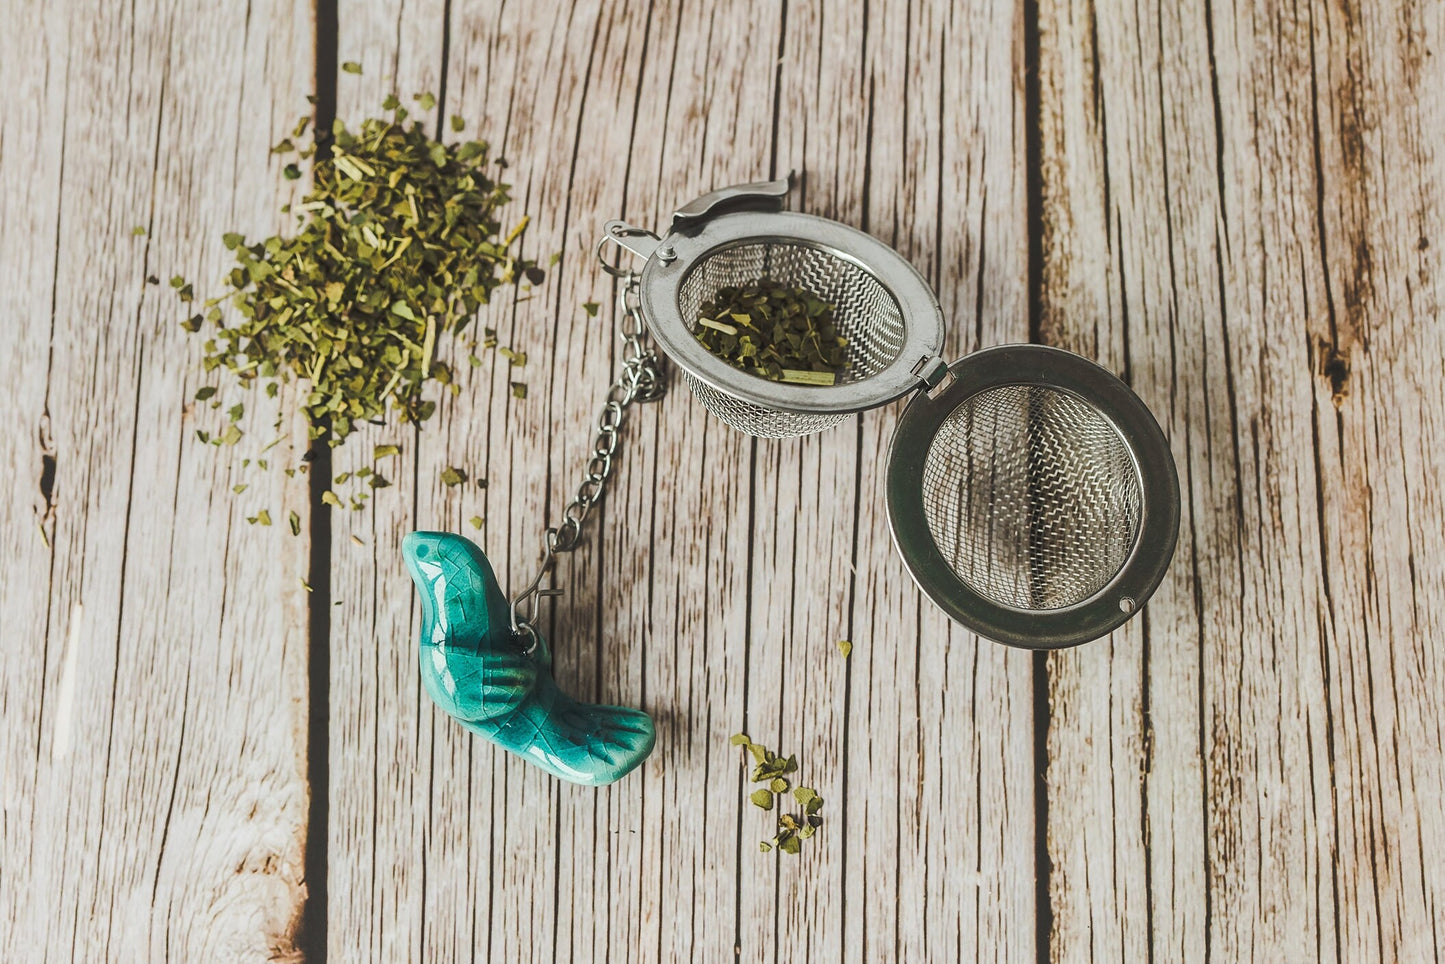 Herbal tea steeper with turquoise green bird - Loose leaf tea strainer with bird charm - Mother's day gift